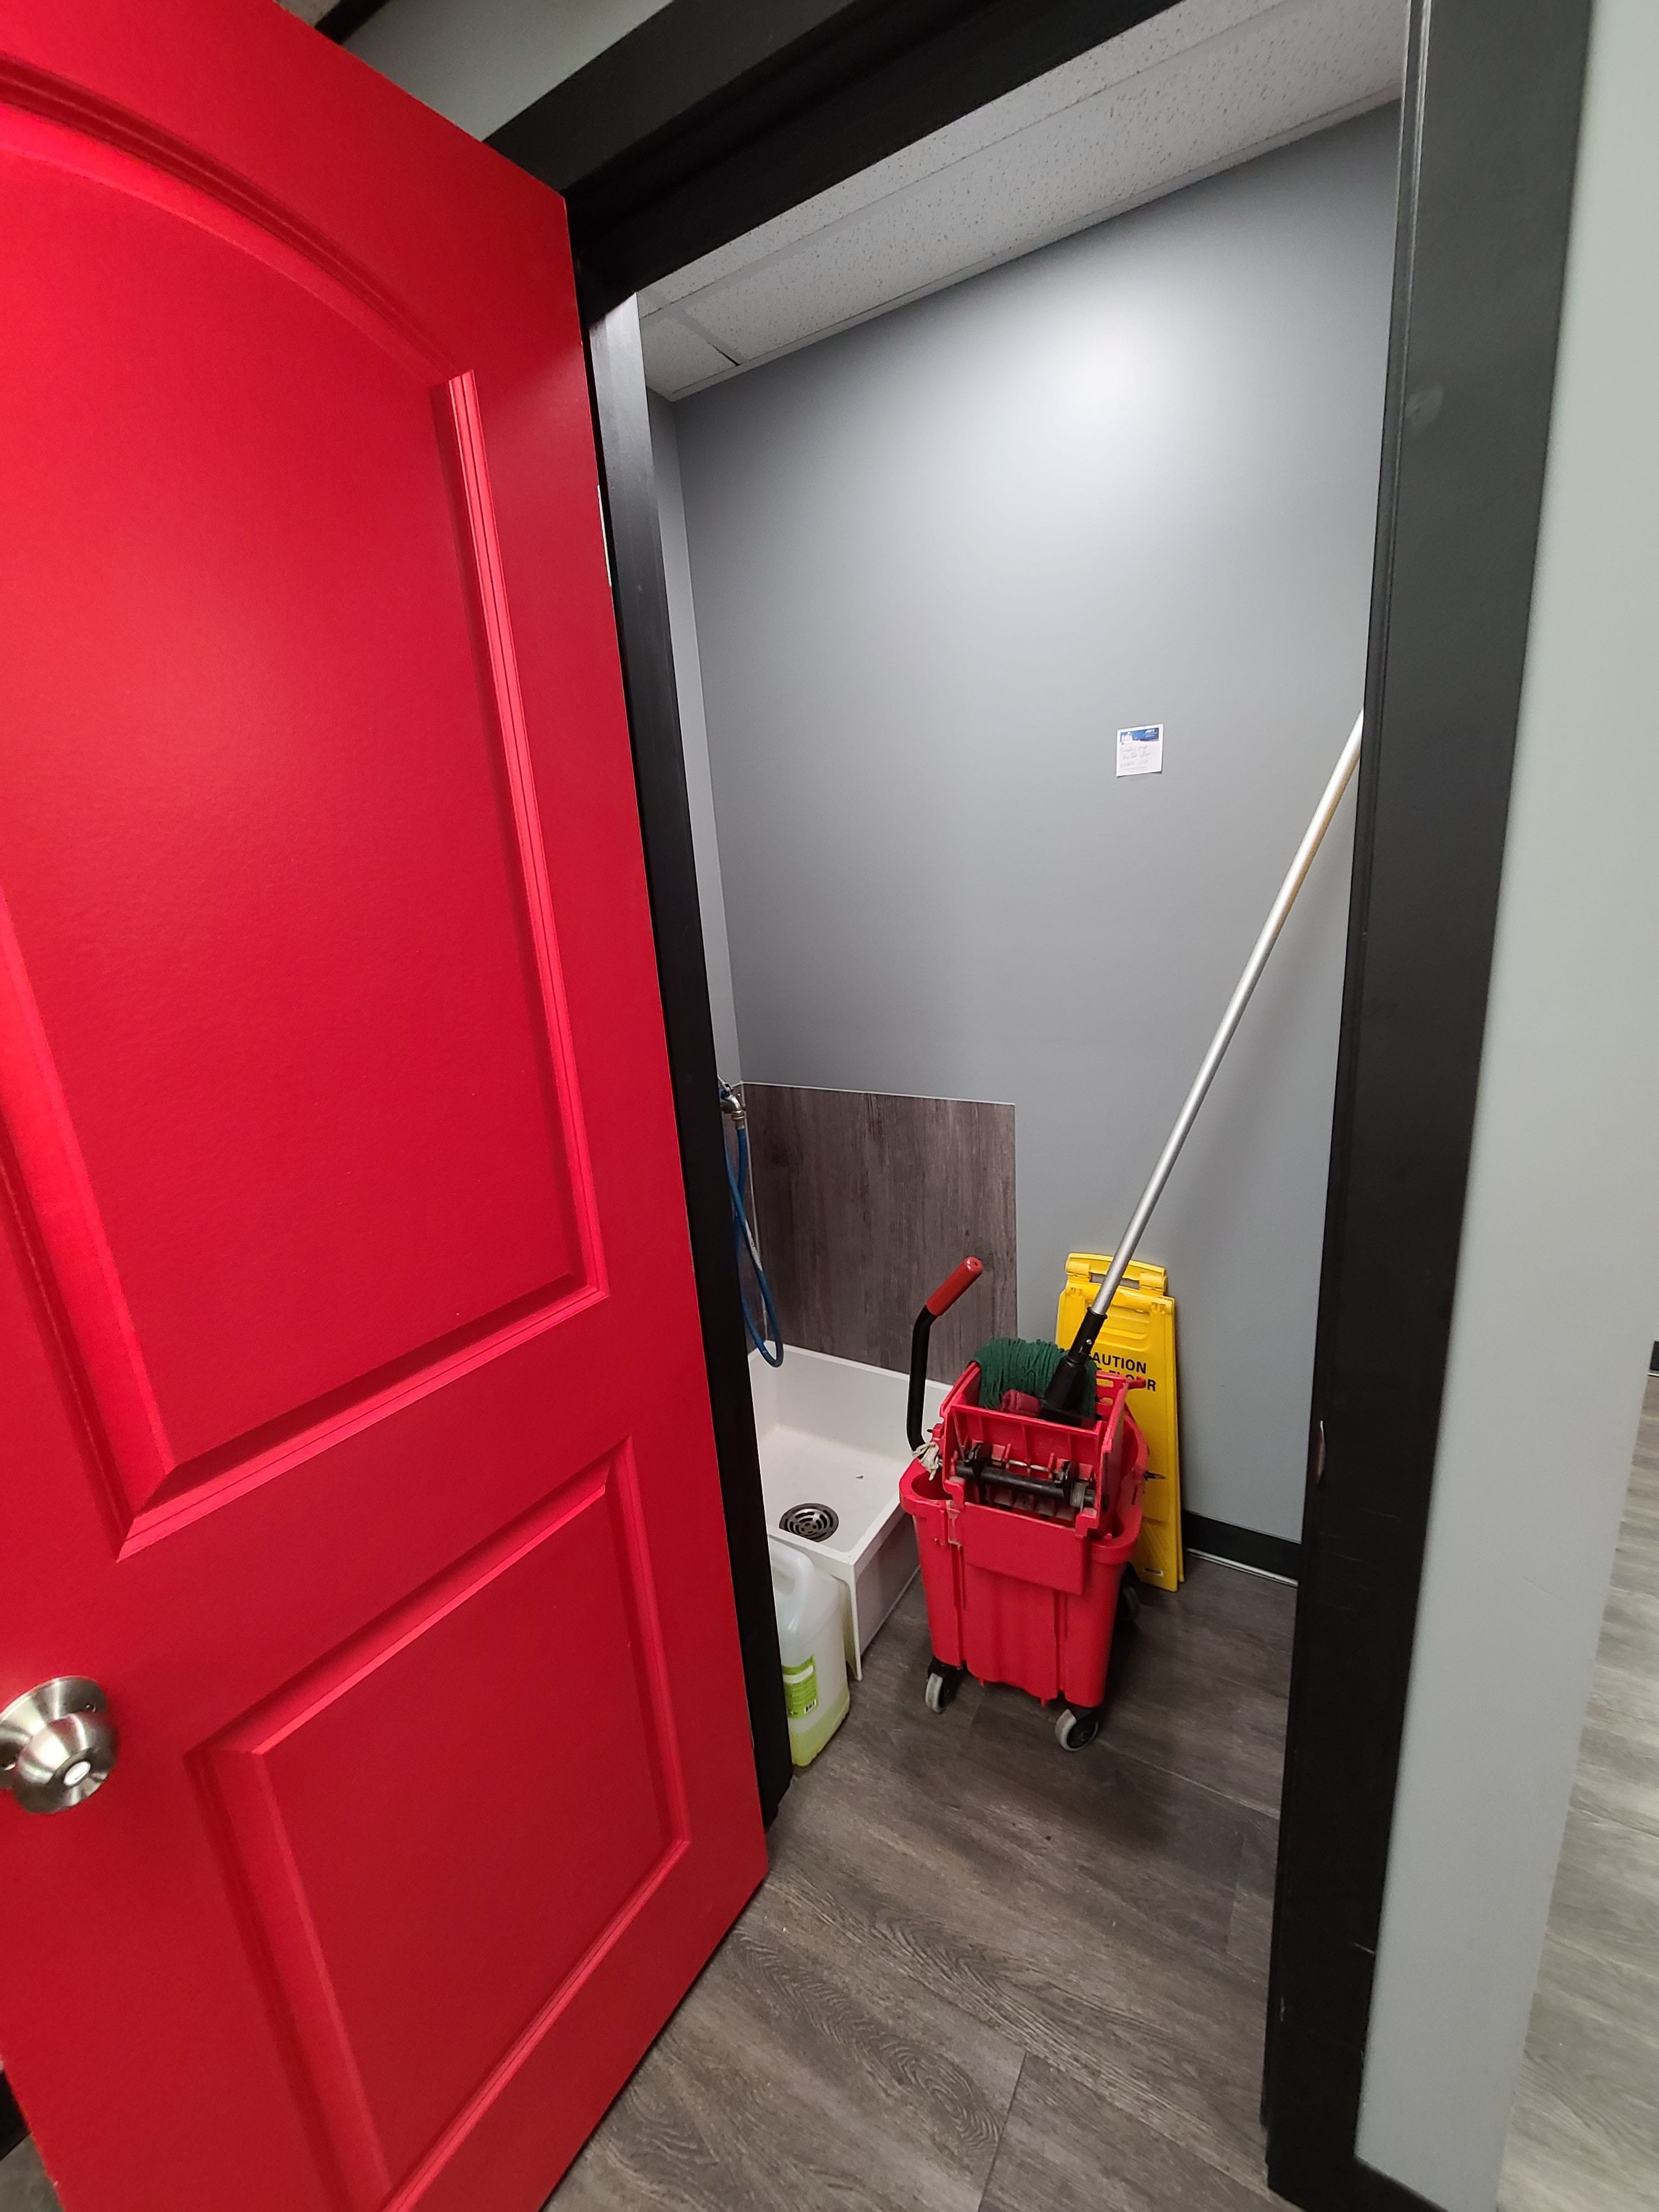 Janitorial Closet with Floor Sink